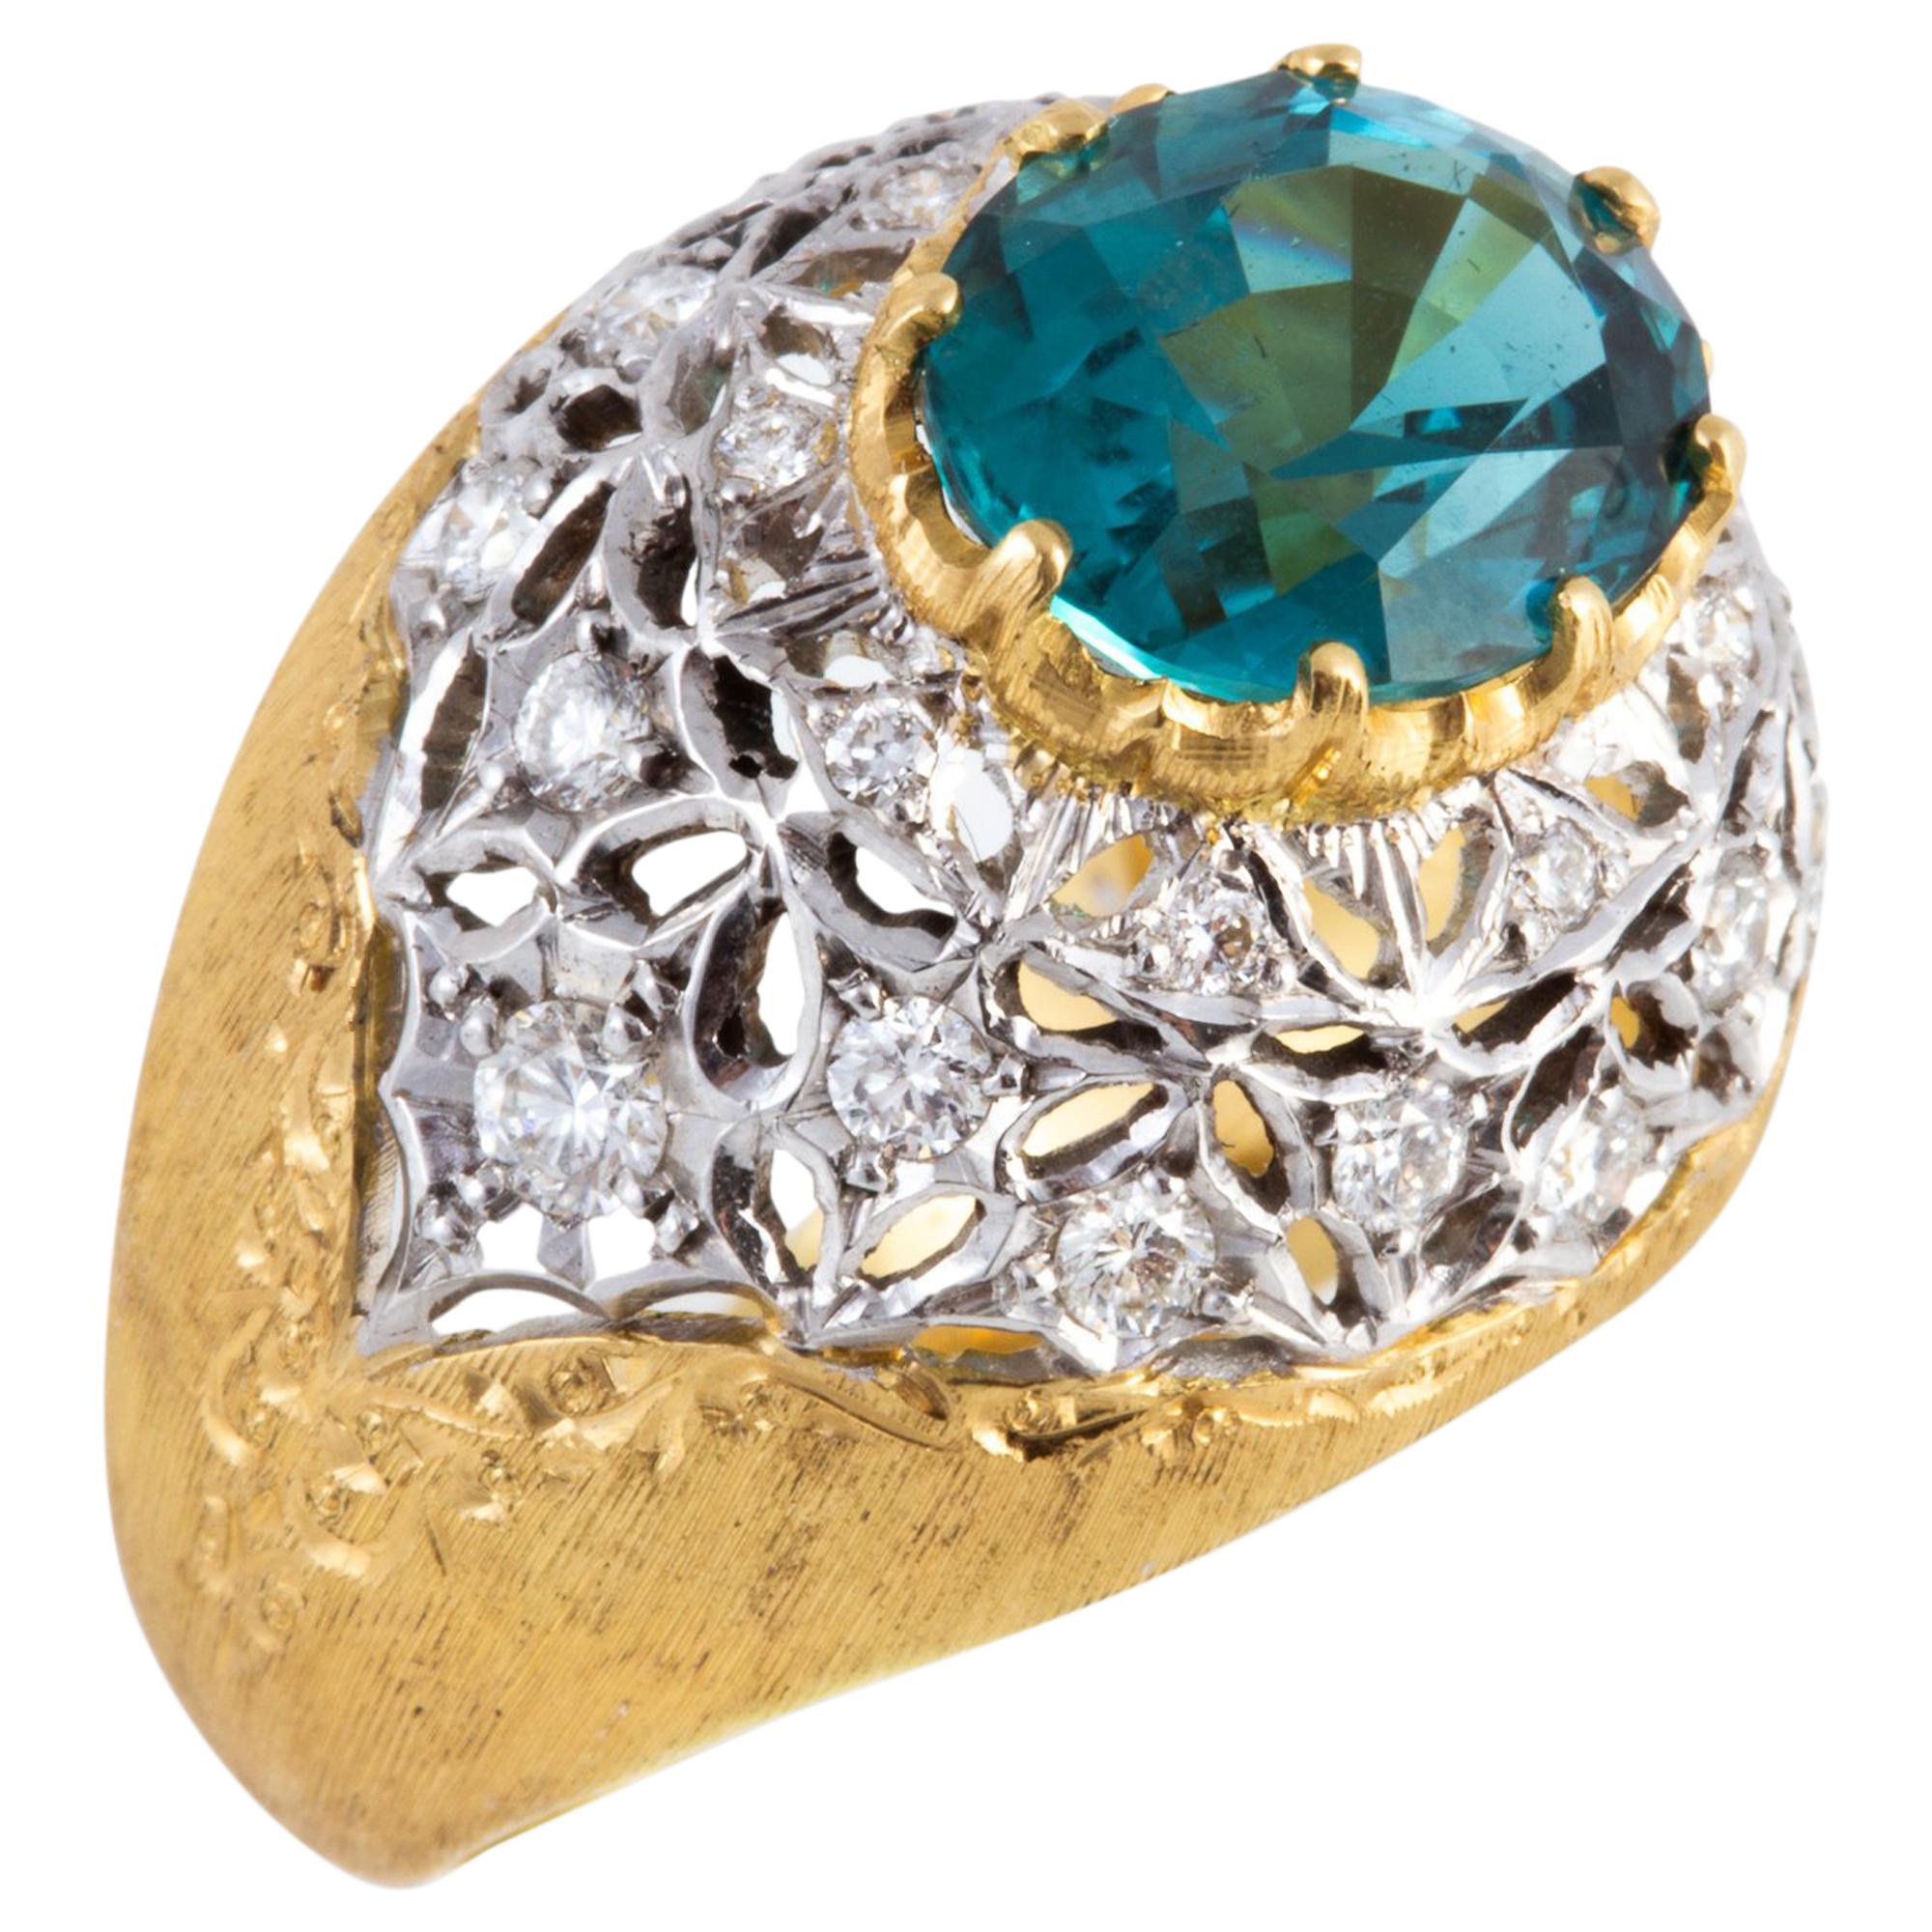 Blue Green Tourmaline and Diamond Ring in Florentine Crafted 18 kt Gold